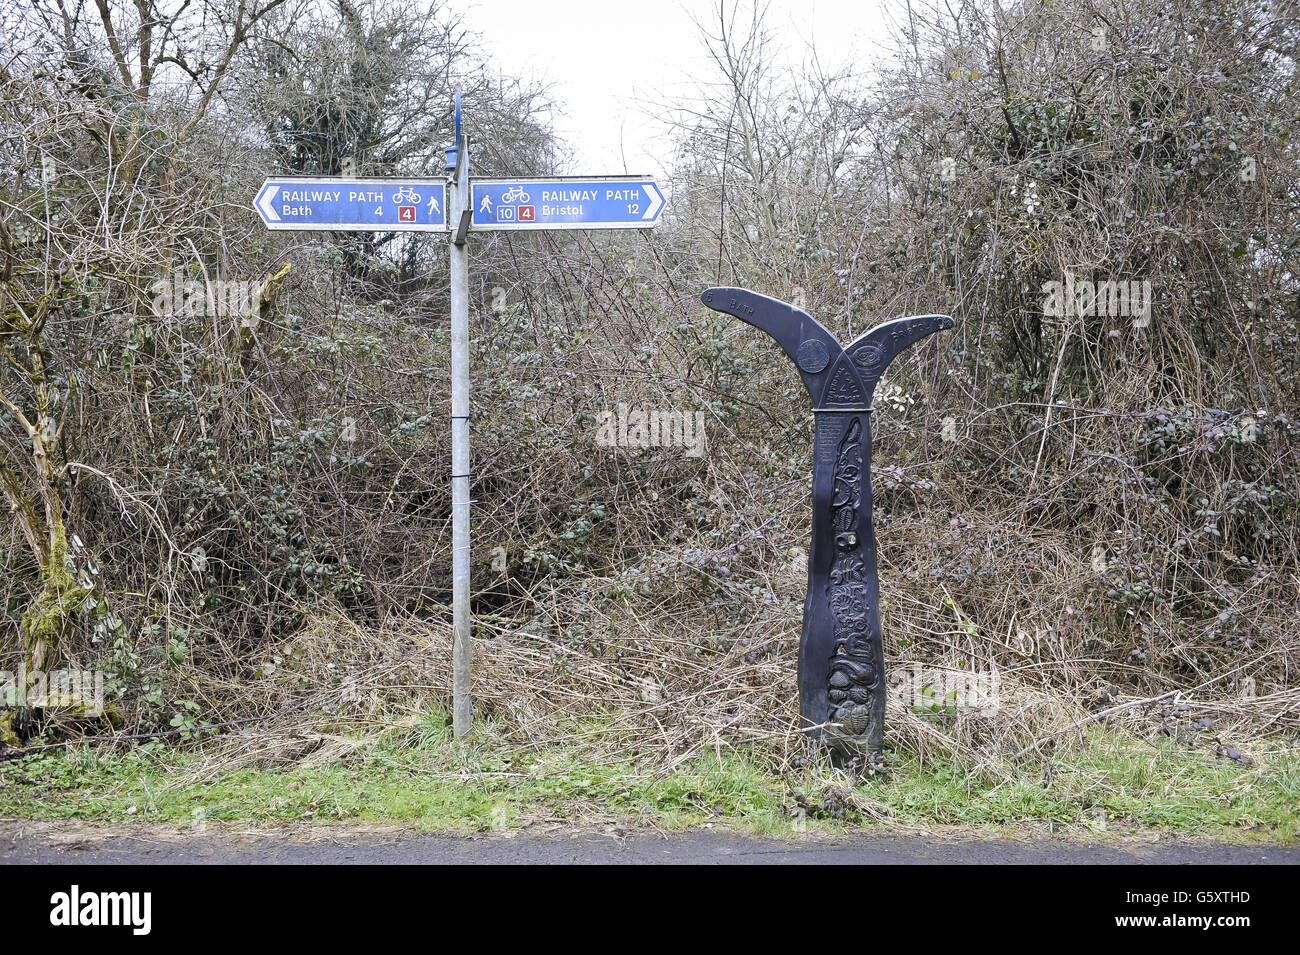 A National Cycle Network sign beside a sculpture artwork on the Bristol & Bath railway path. The Bristol & Bath Railway Path was constructed on the track bed of the former Midland Railway which closed for passenger traffic at the end of the 1960s. Between 1979 and 1986, the railway line was converted into the Railway Path by cycling charity Sustrans. The first stretch was between Bath and Bitton where the campaign group, Cyclebag obtained planning permission to create the 2m wide dust track. The route then developed westwards with Bristol being the last section. This was tarmaced from the Stock Photo